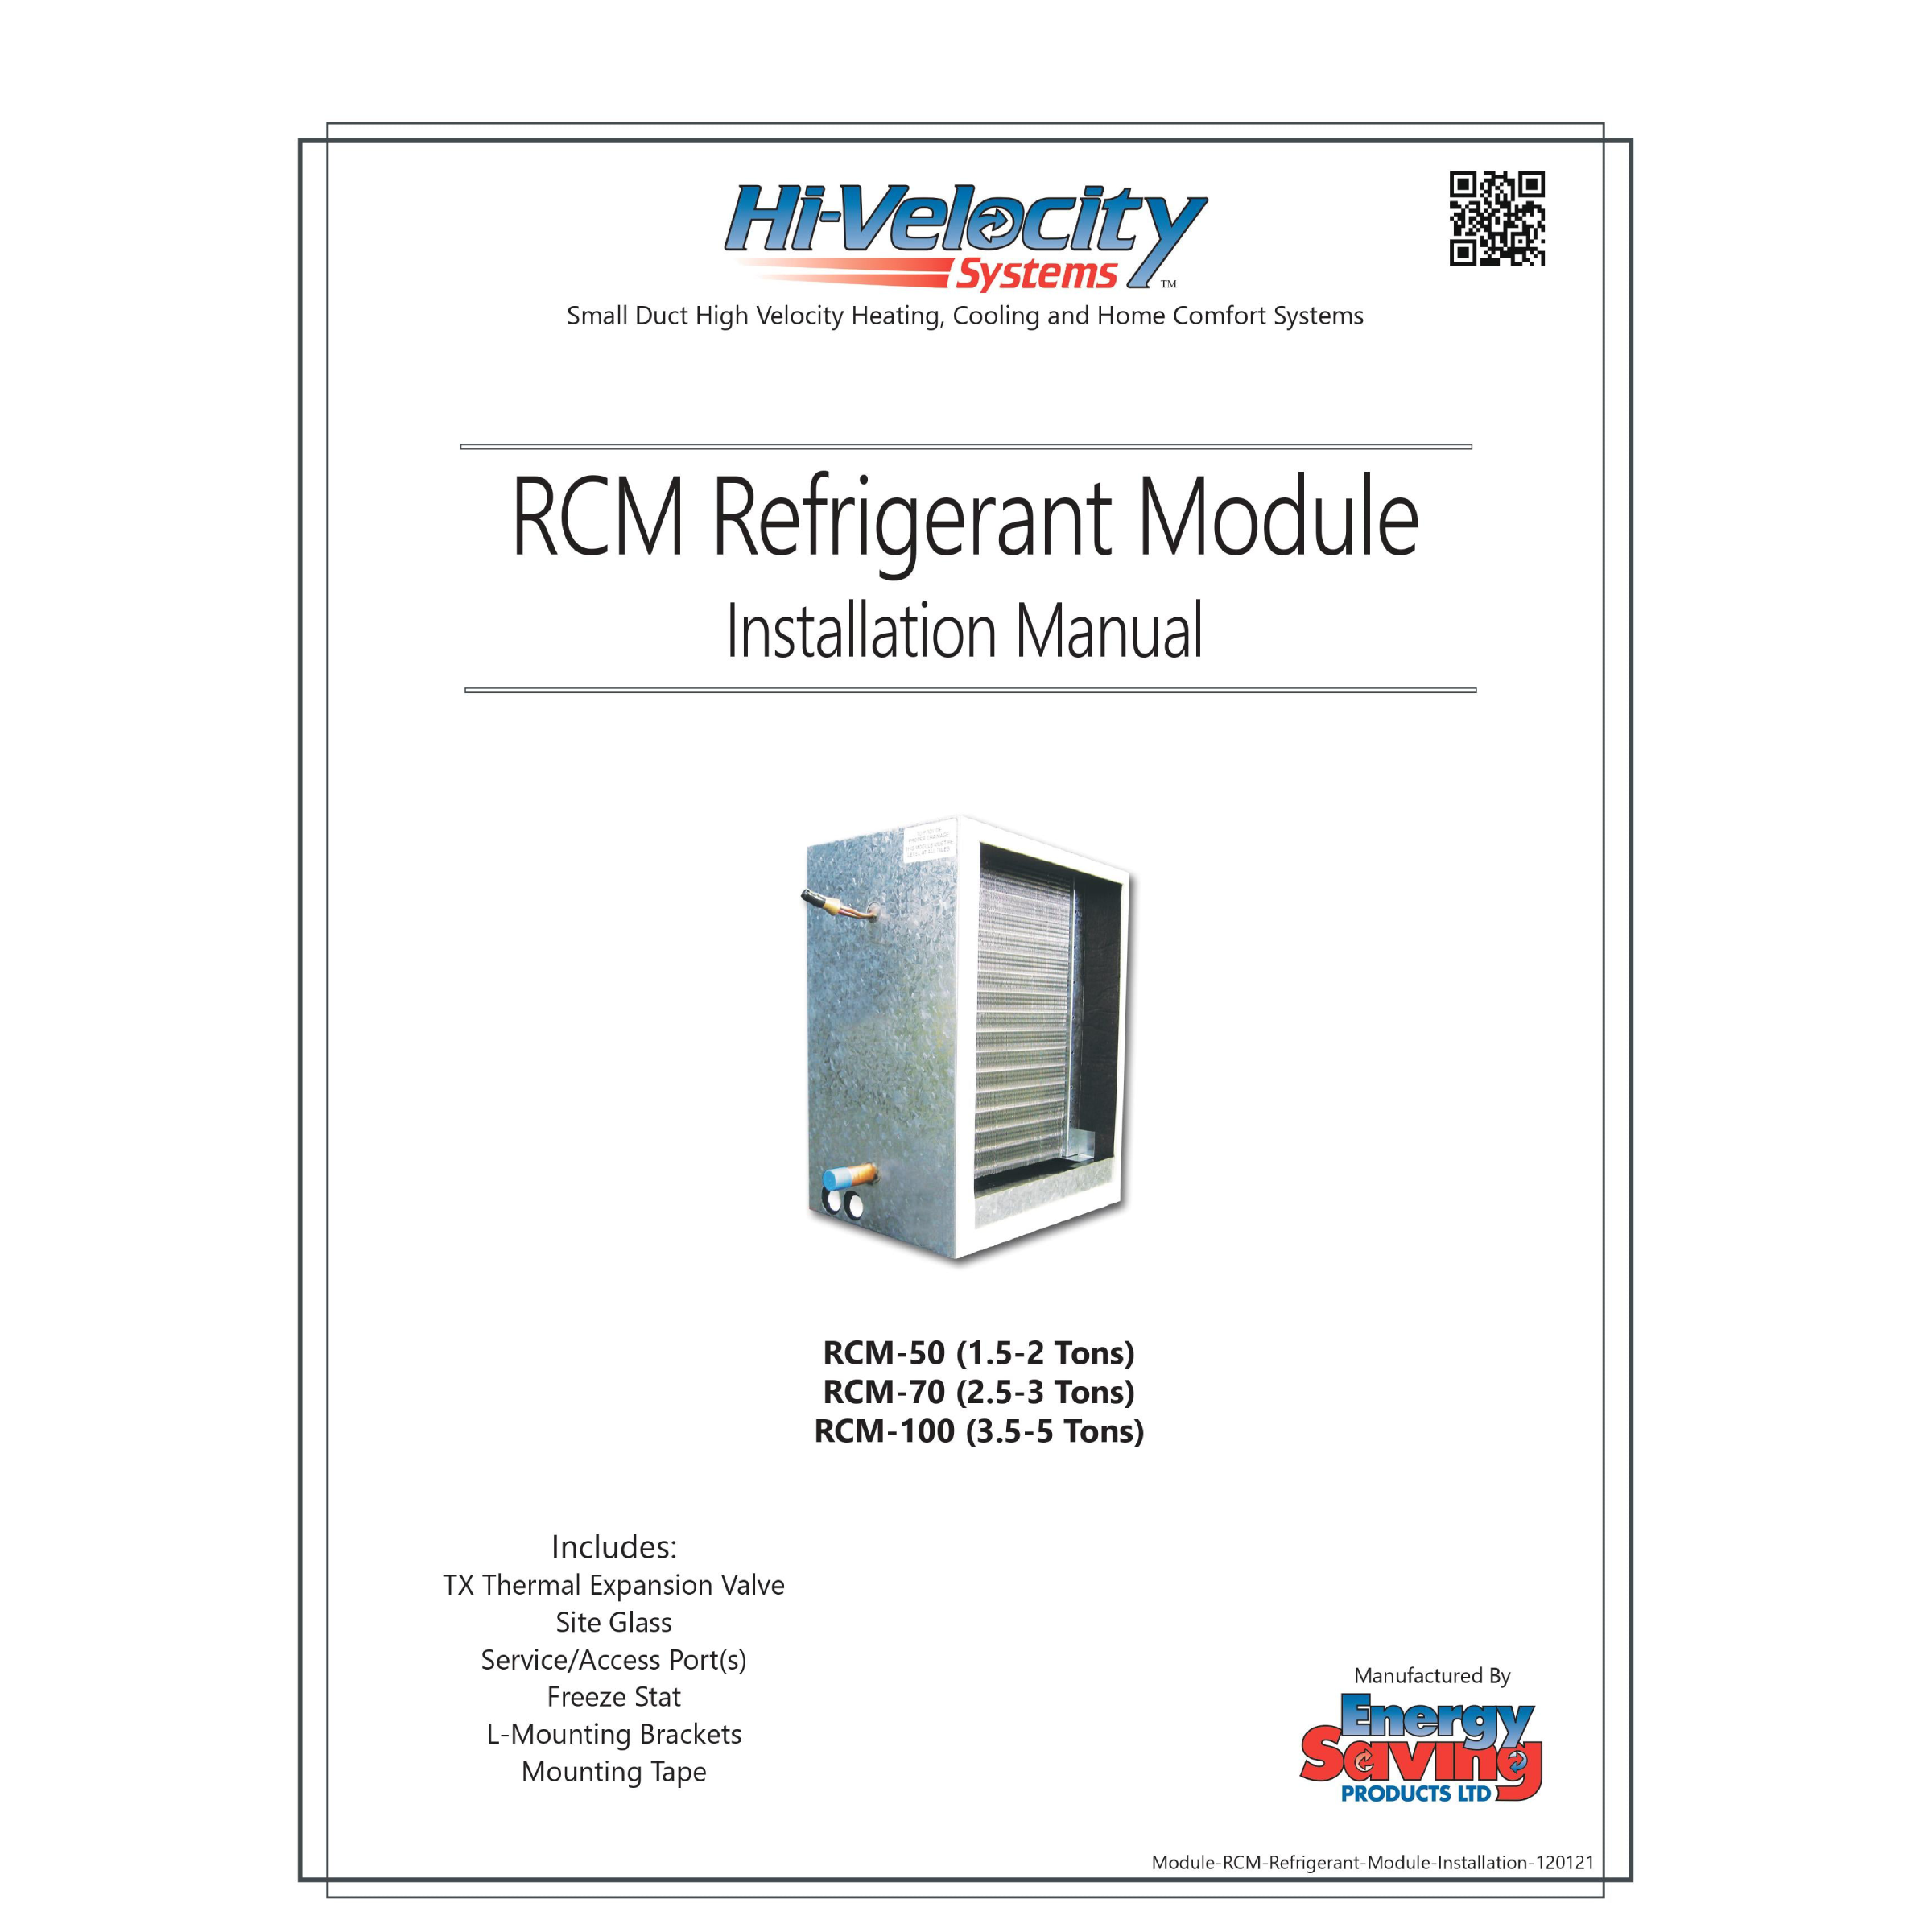 Hi-Velocity RCM Series Refrigerant Heat Pump Ready Cooling Module 1 to 5 Tons, R-410A